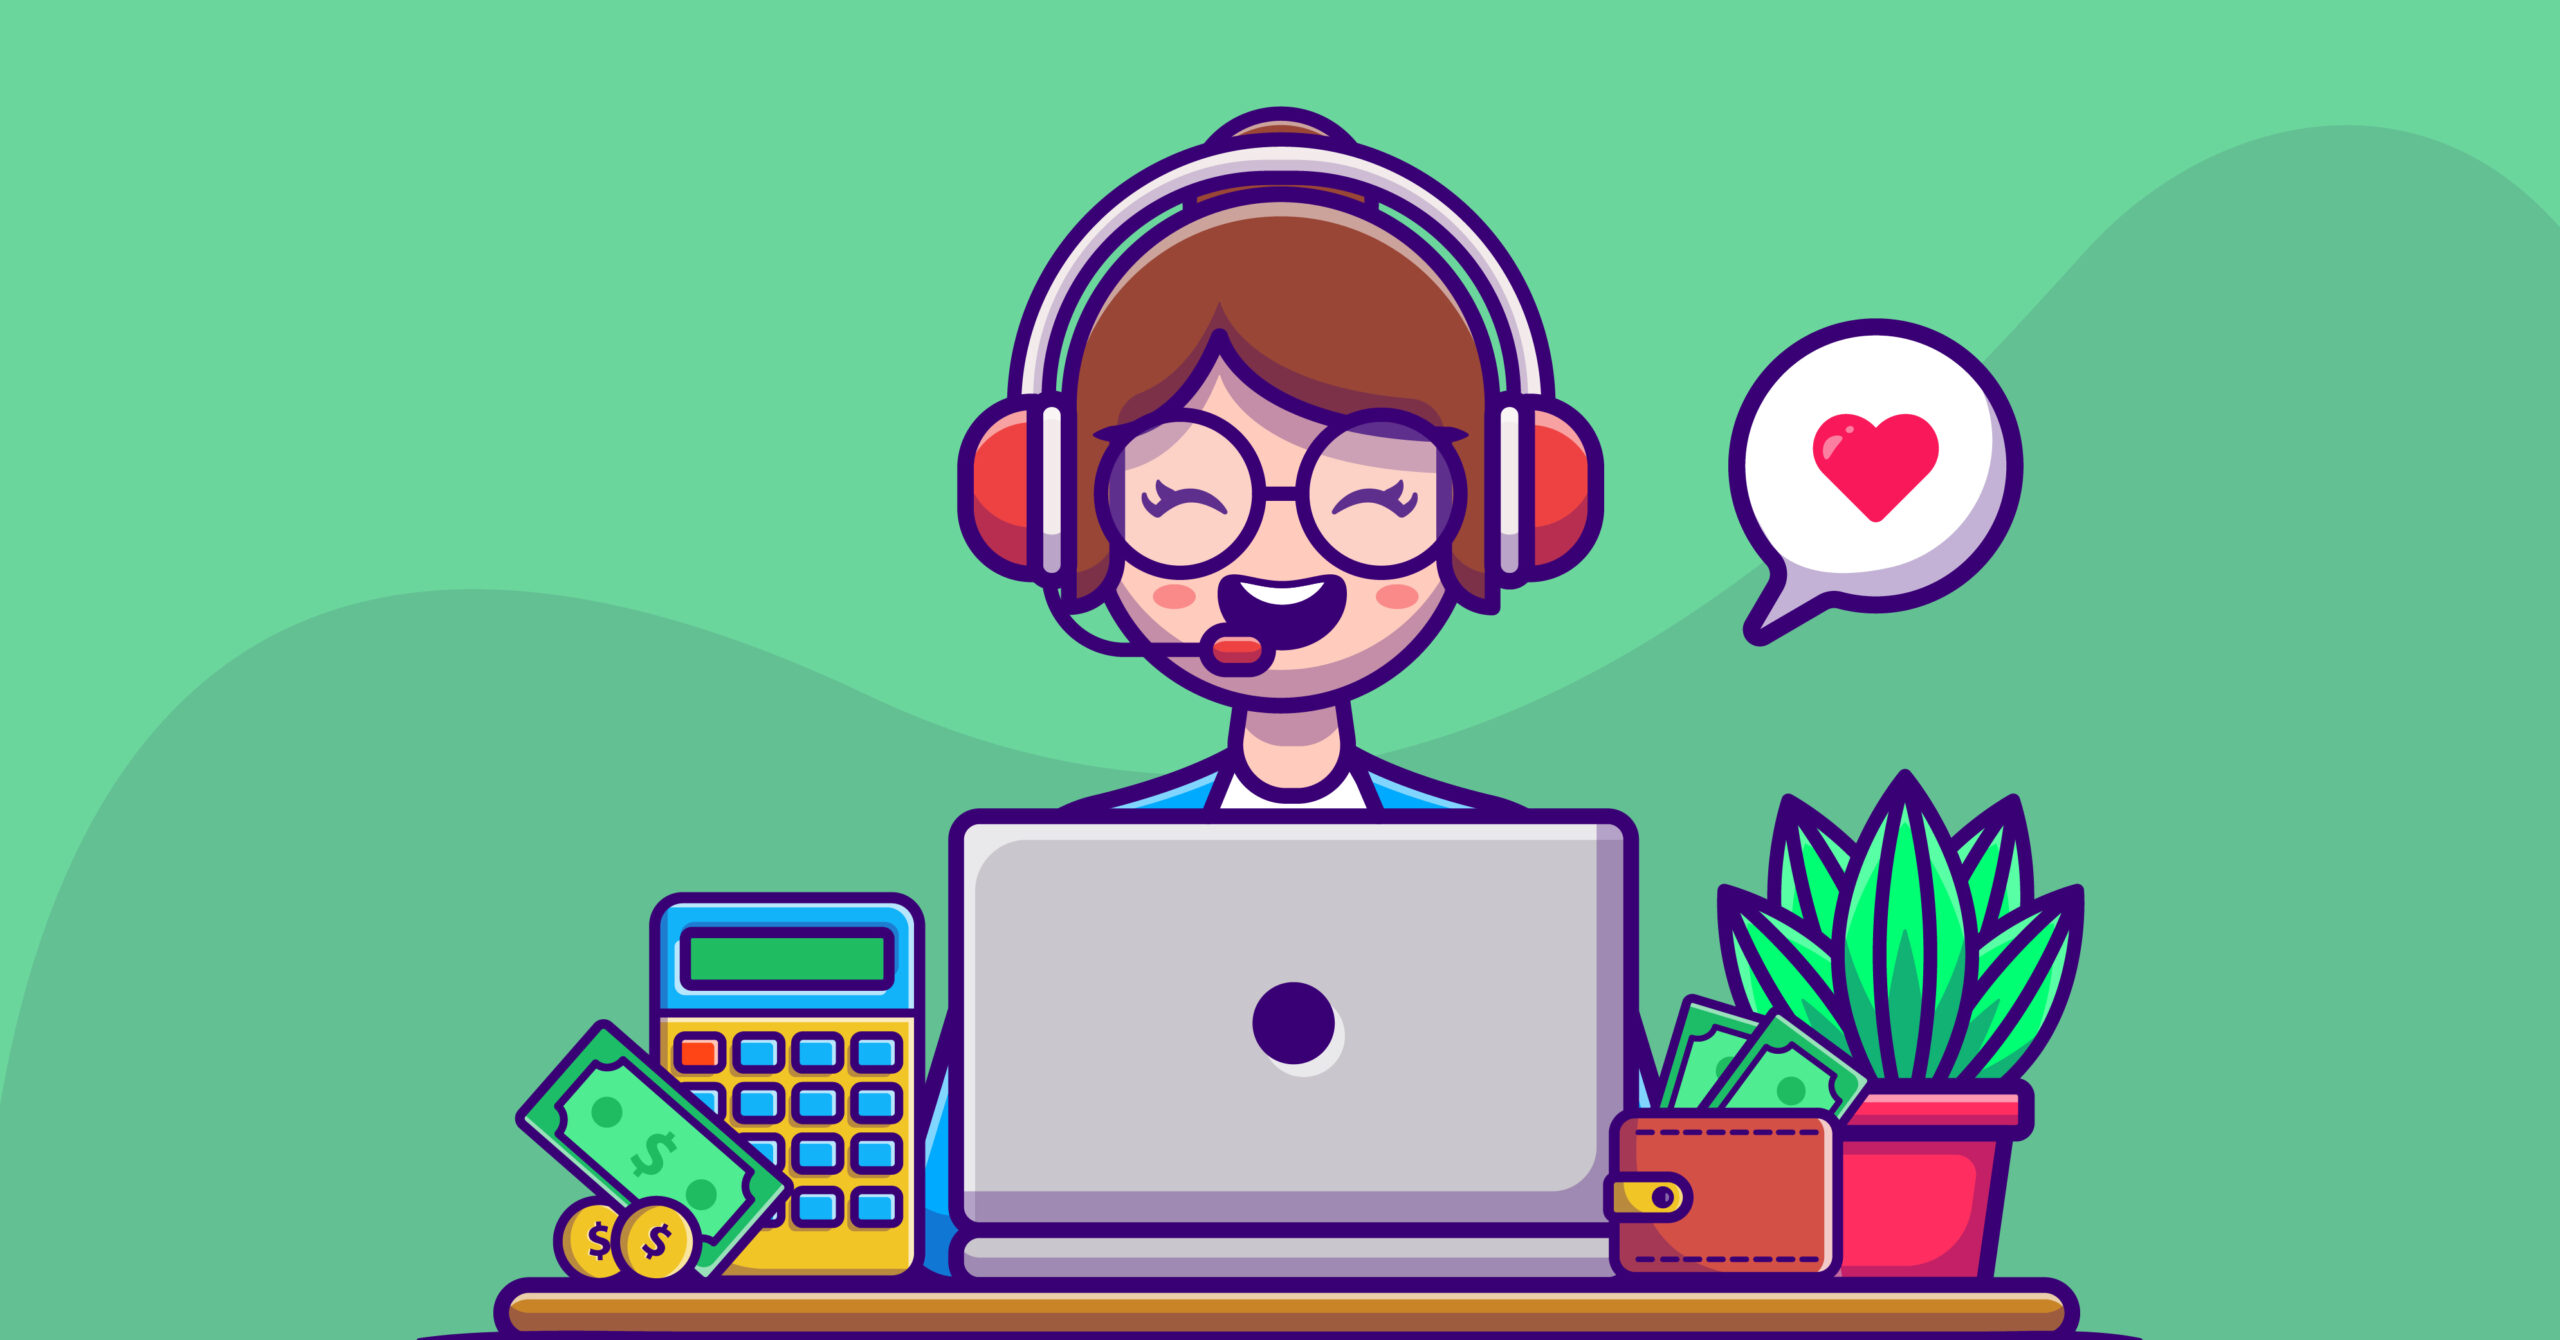 How much does Customer Support cost?